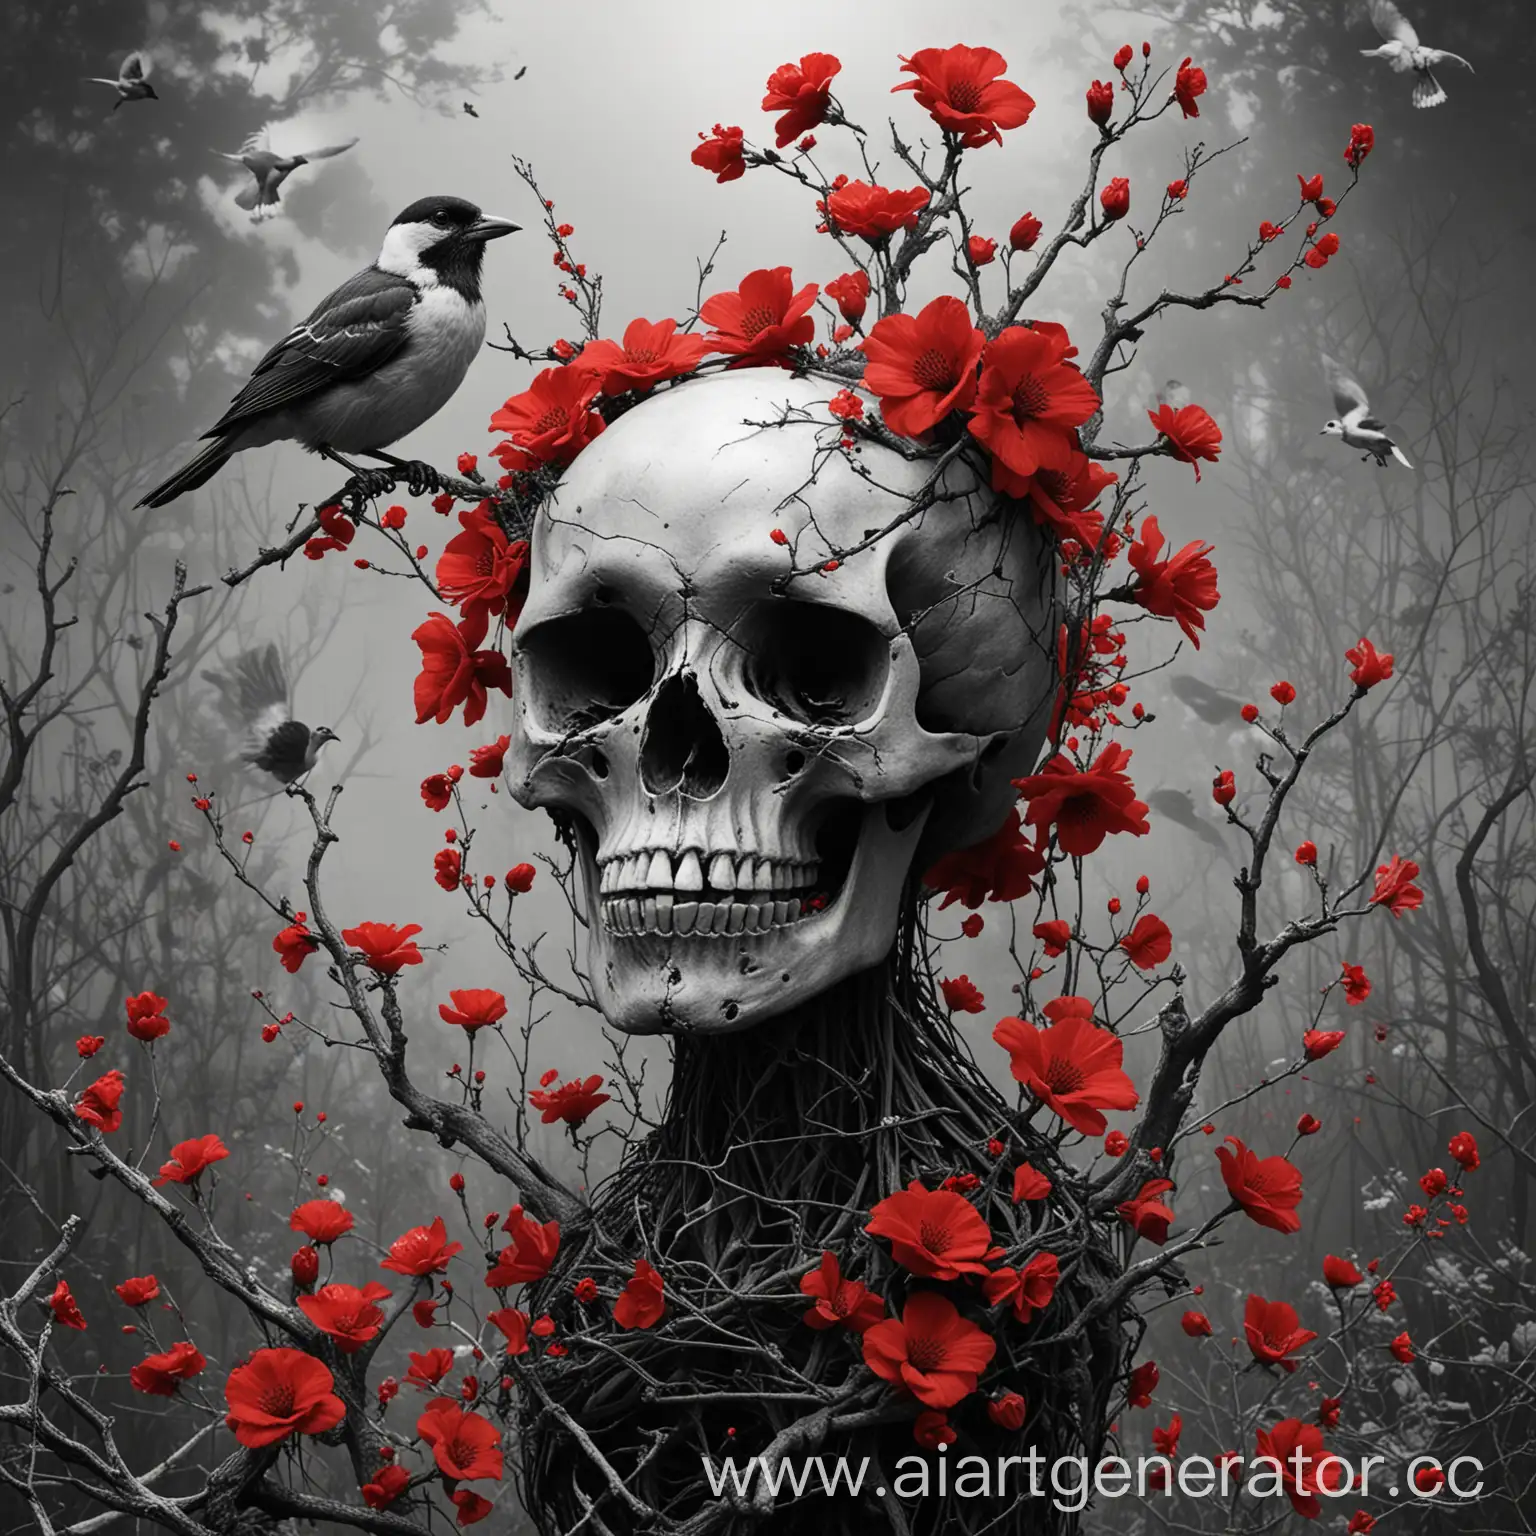 Skullheaded-Bird-Perched-on-Withering-Branch-Eerie-Album-Cover-Art